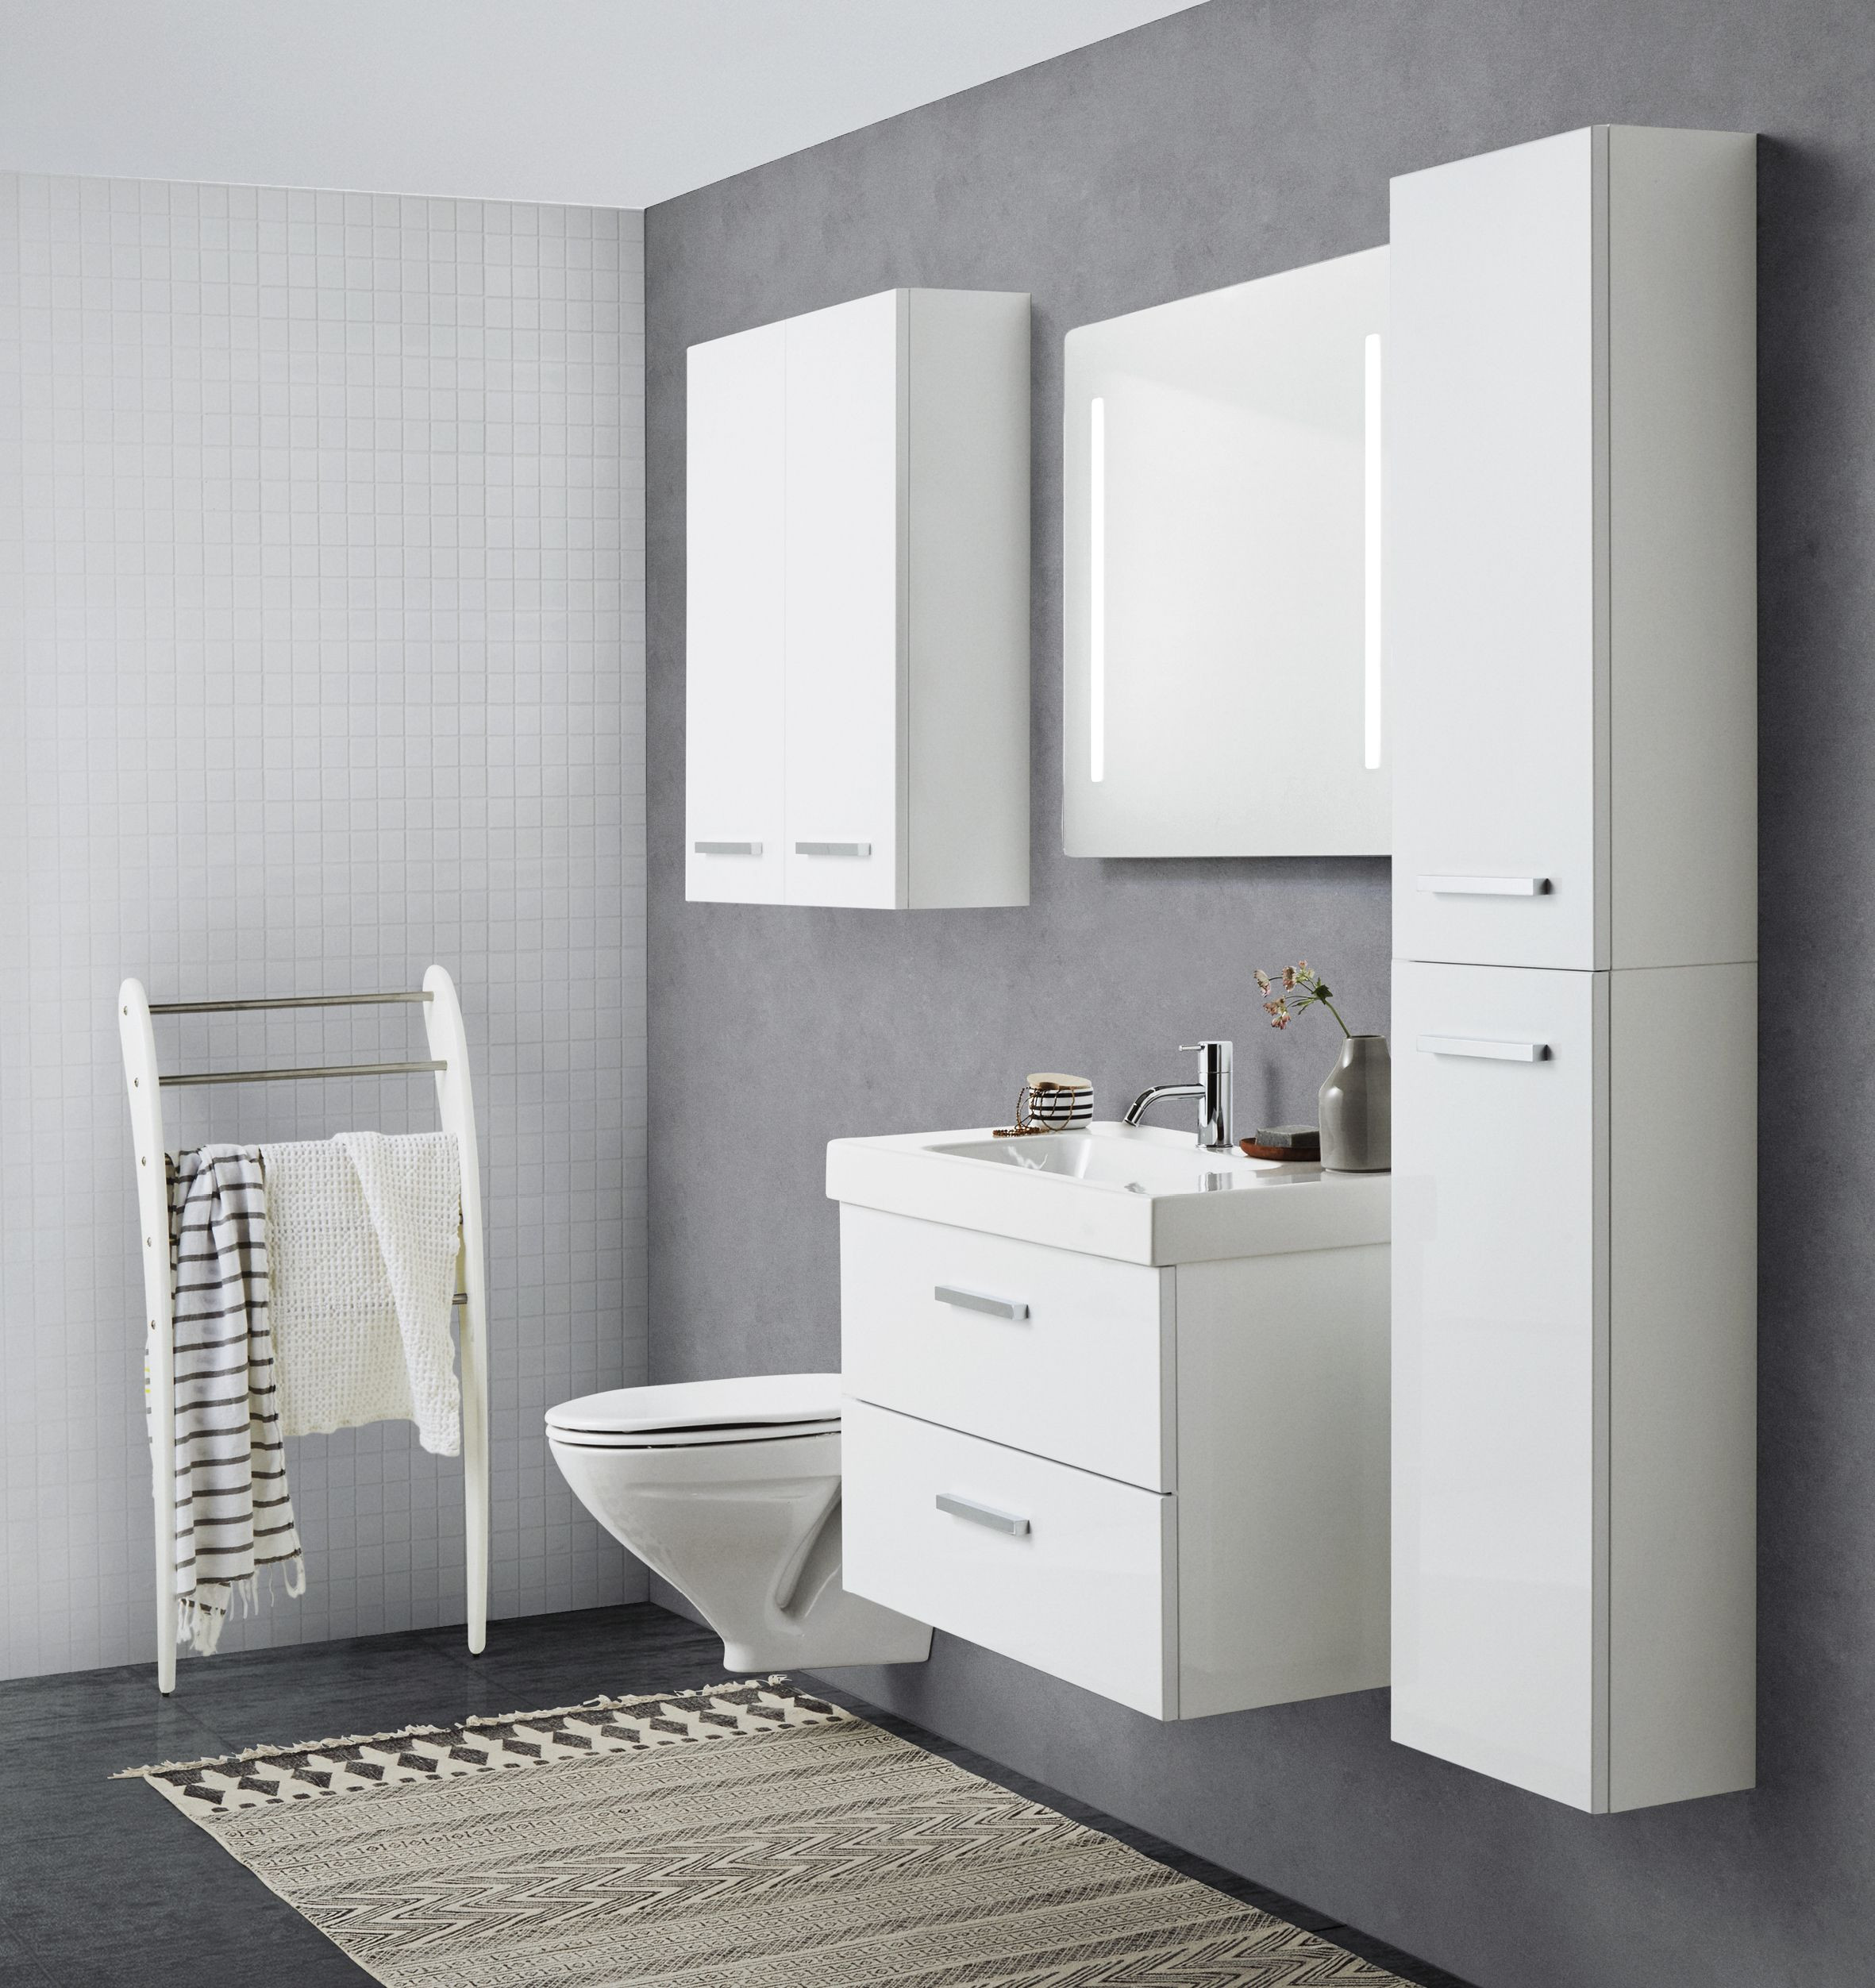 Narrow Bathroom Wall Cabinet
 Small but spacious in the small and narrow bathroom Mini